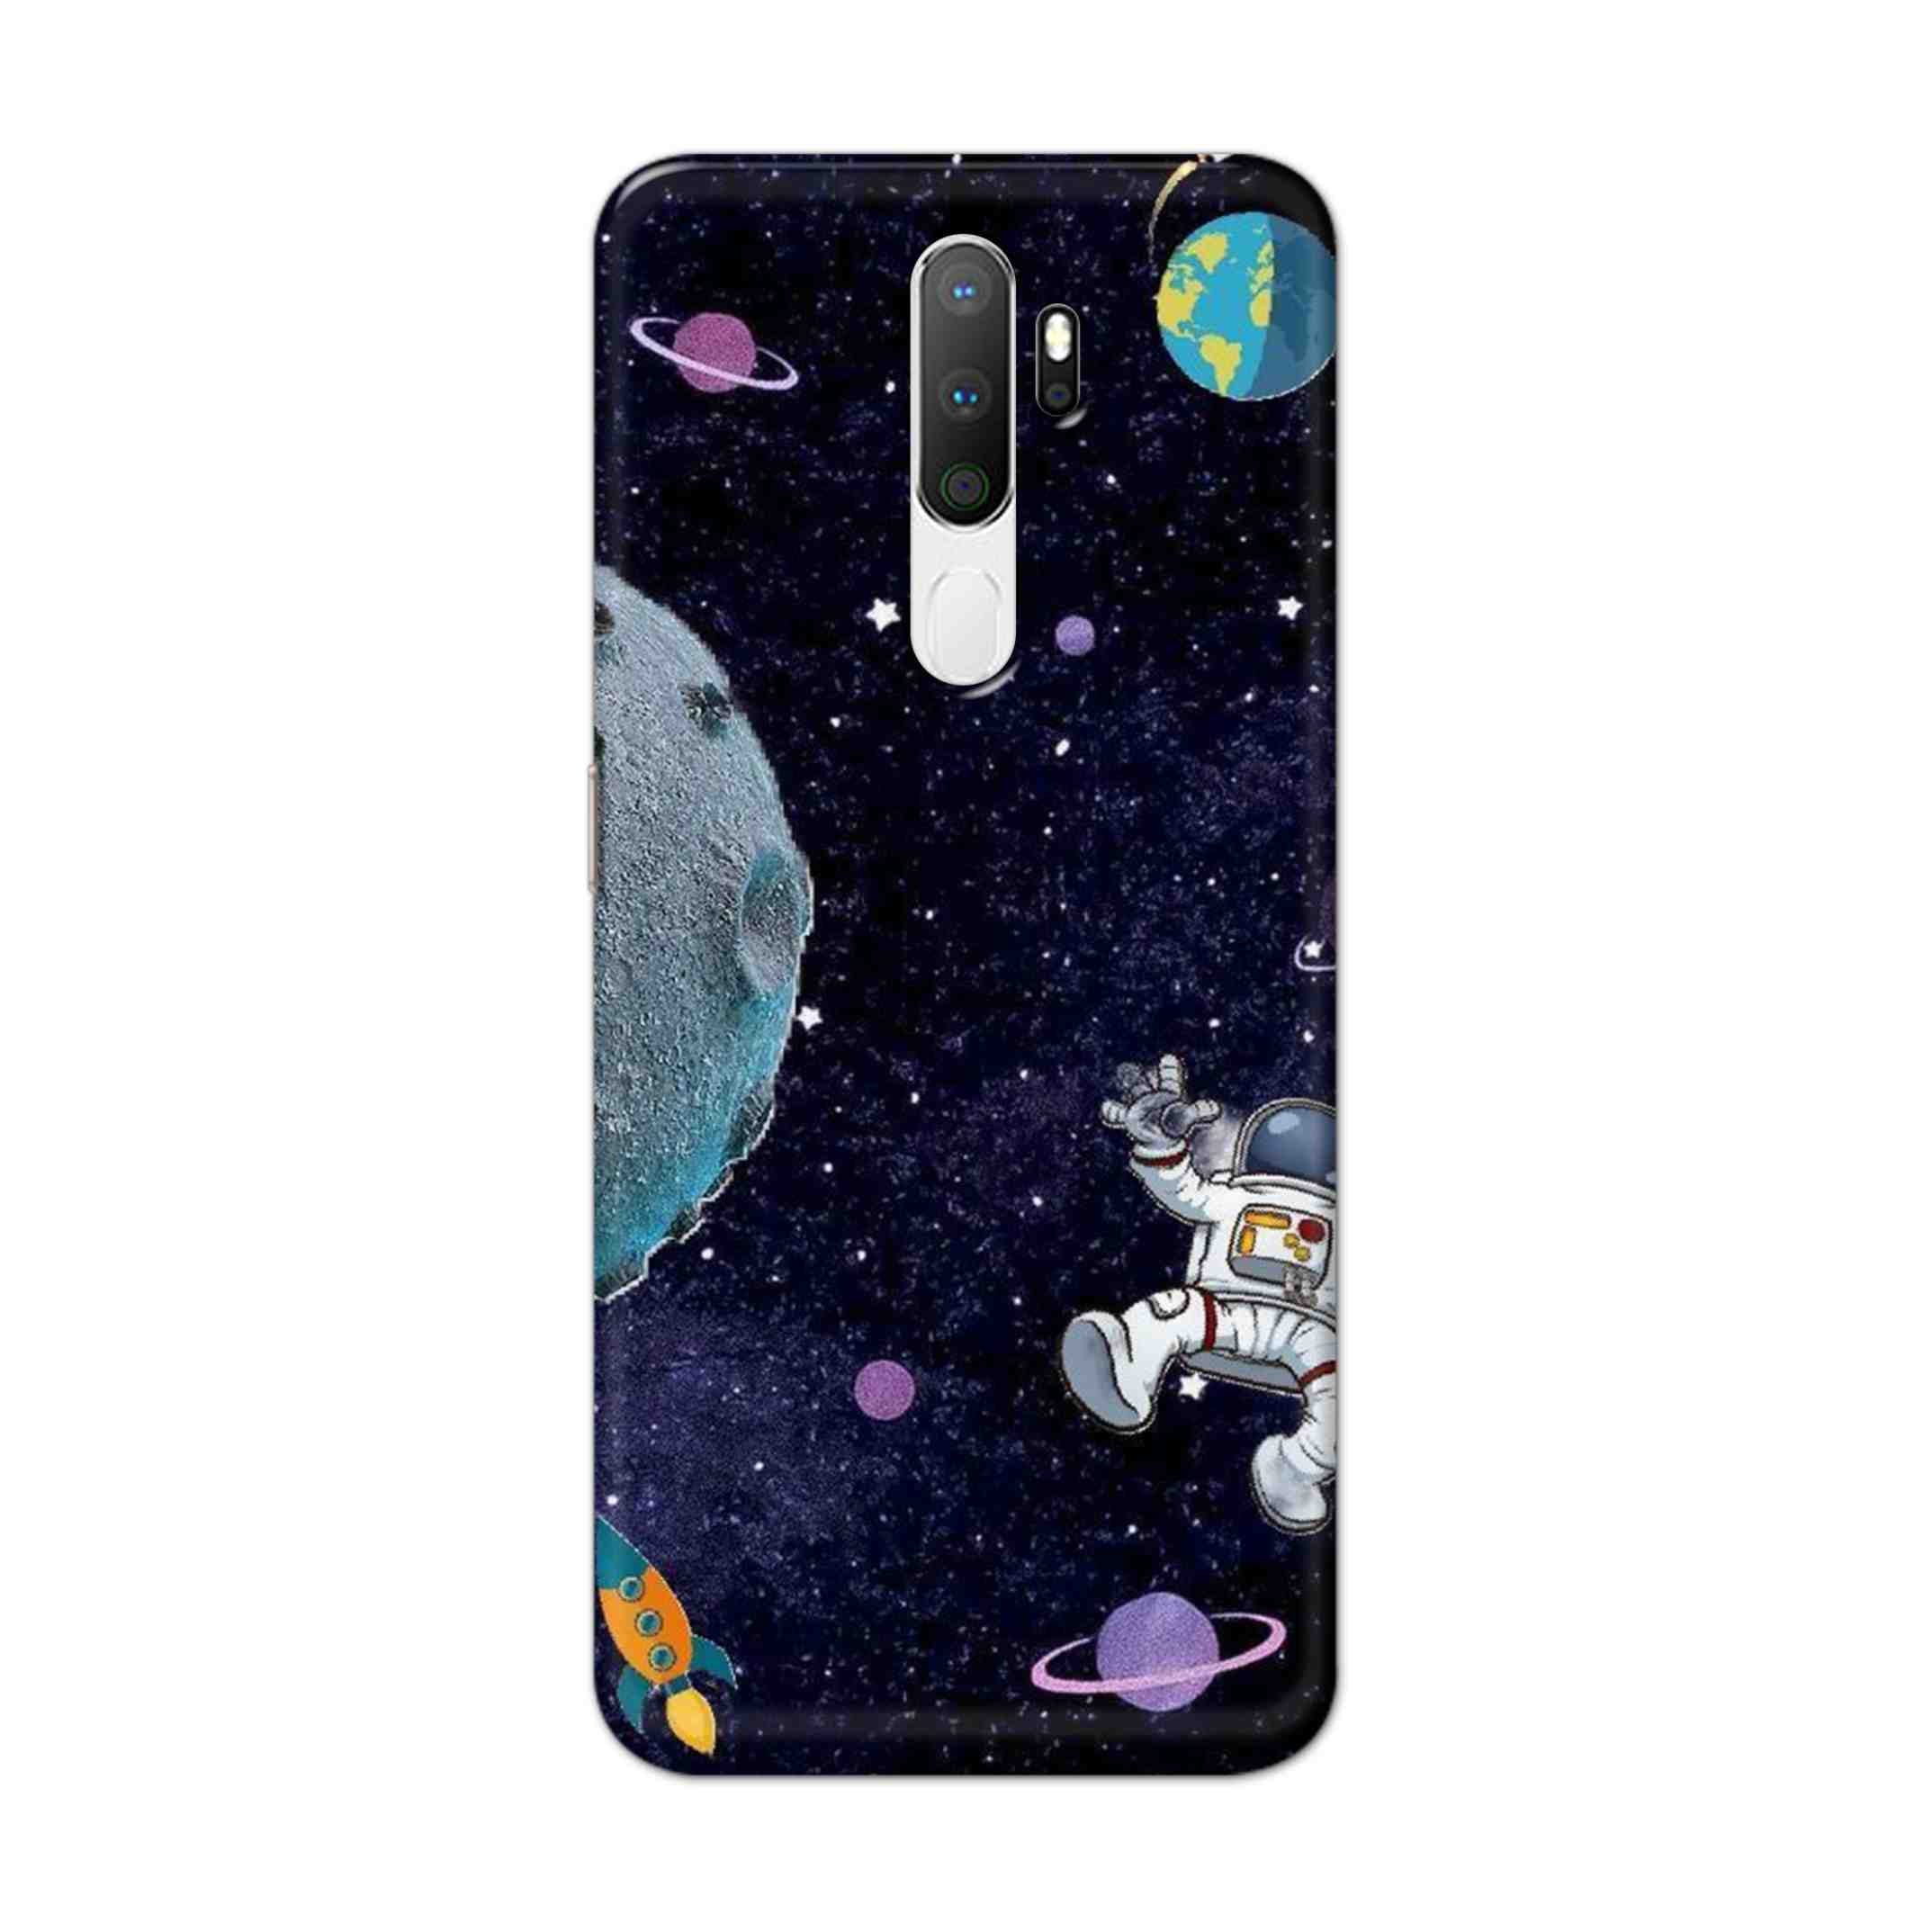 Buy Space Hard Back Mobile Phone Case Cover For Oppo A5 (2020) Online